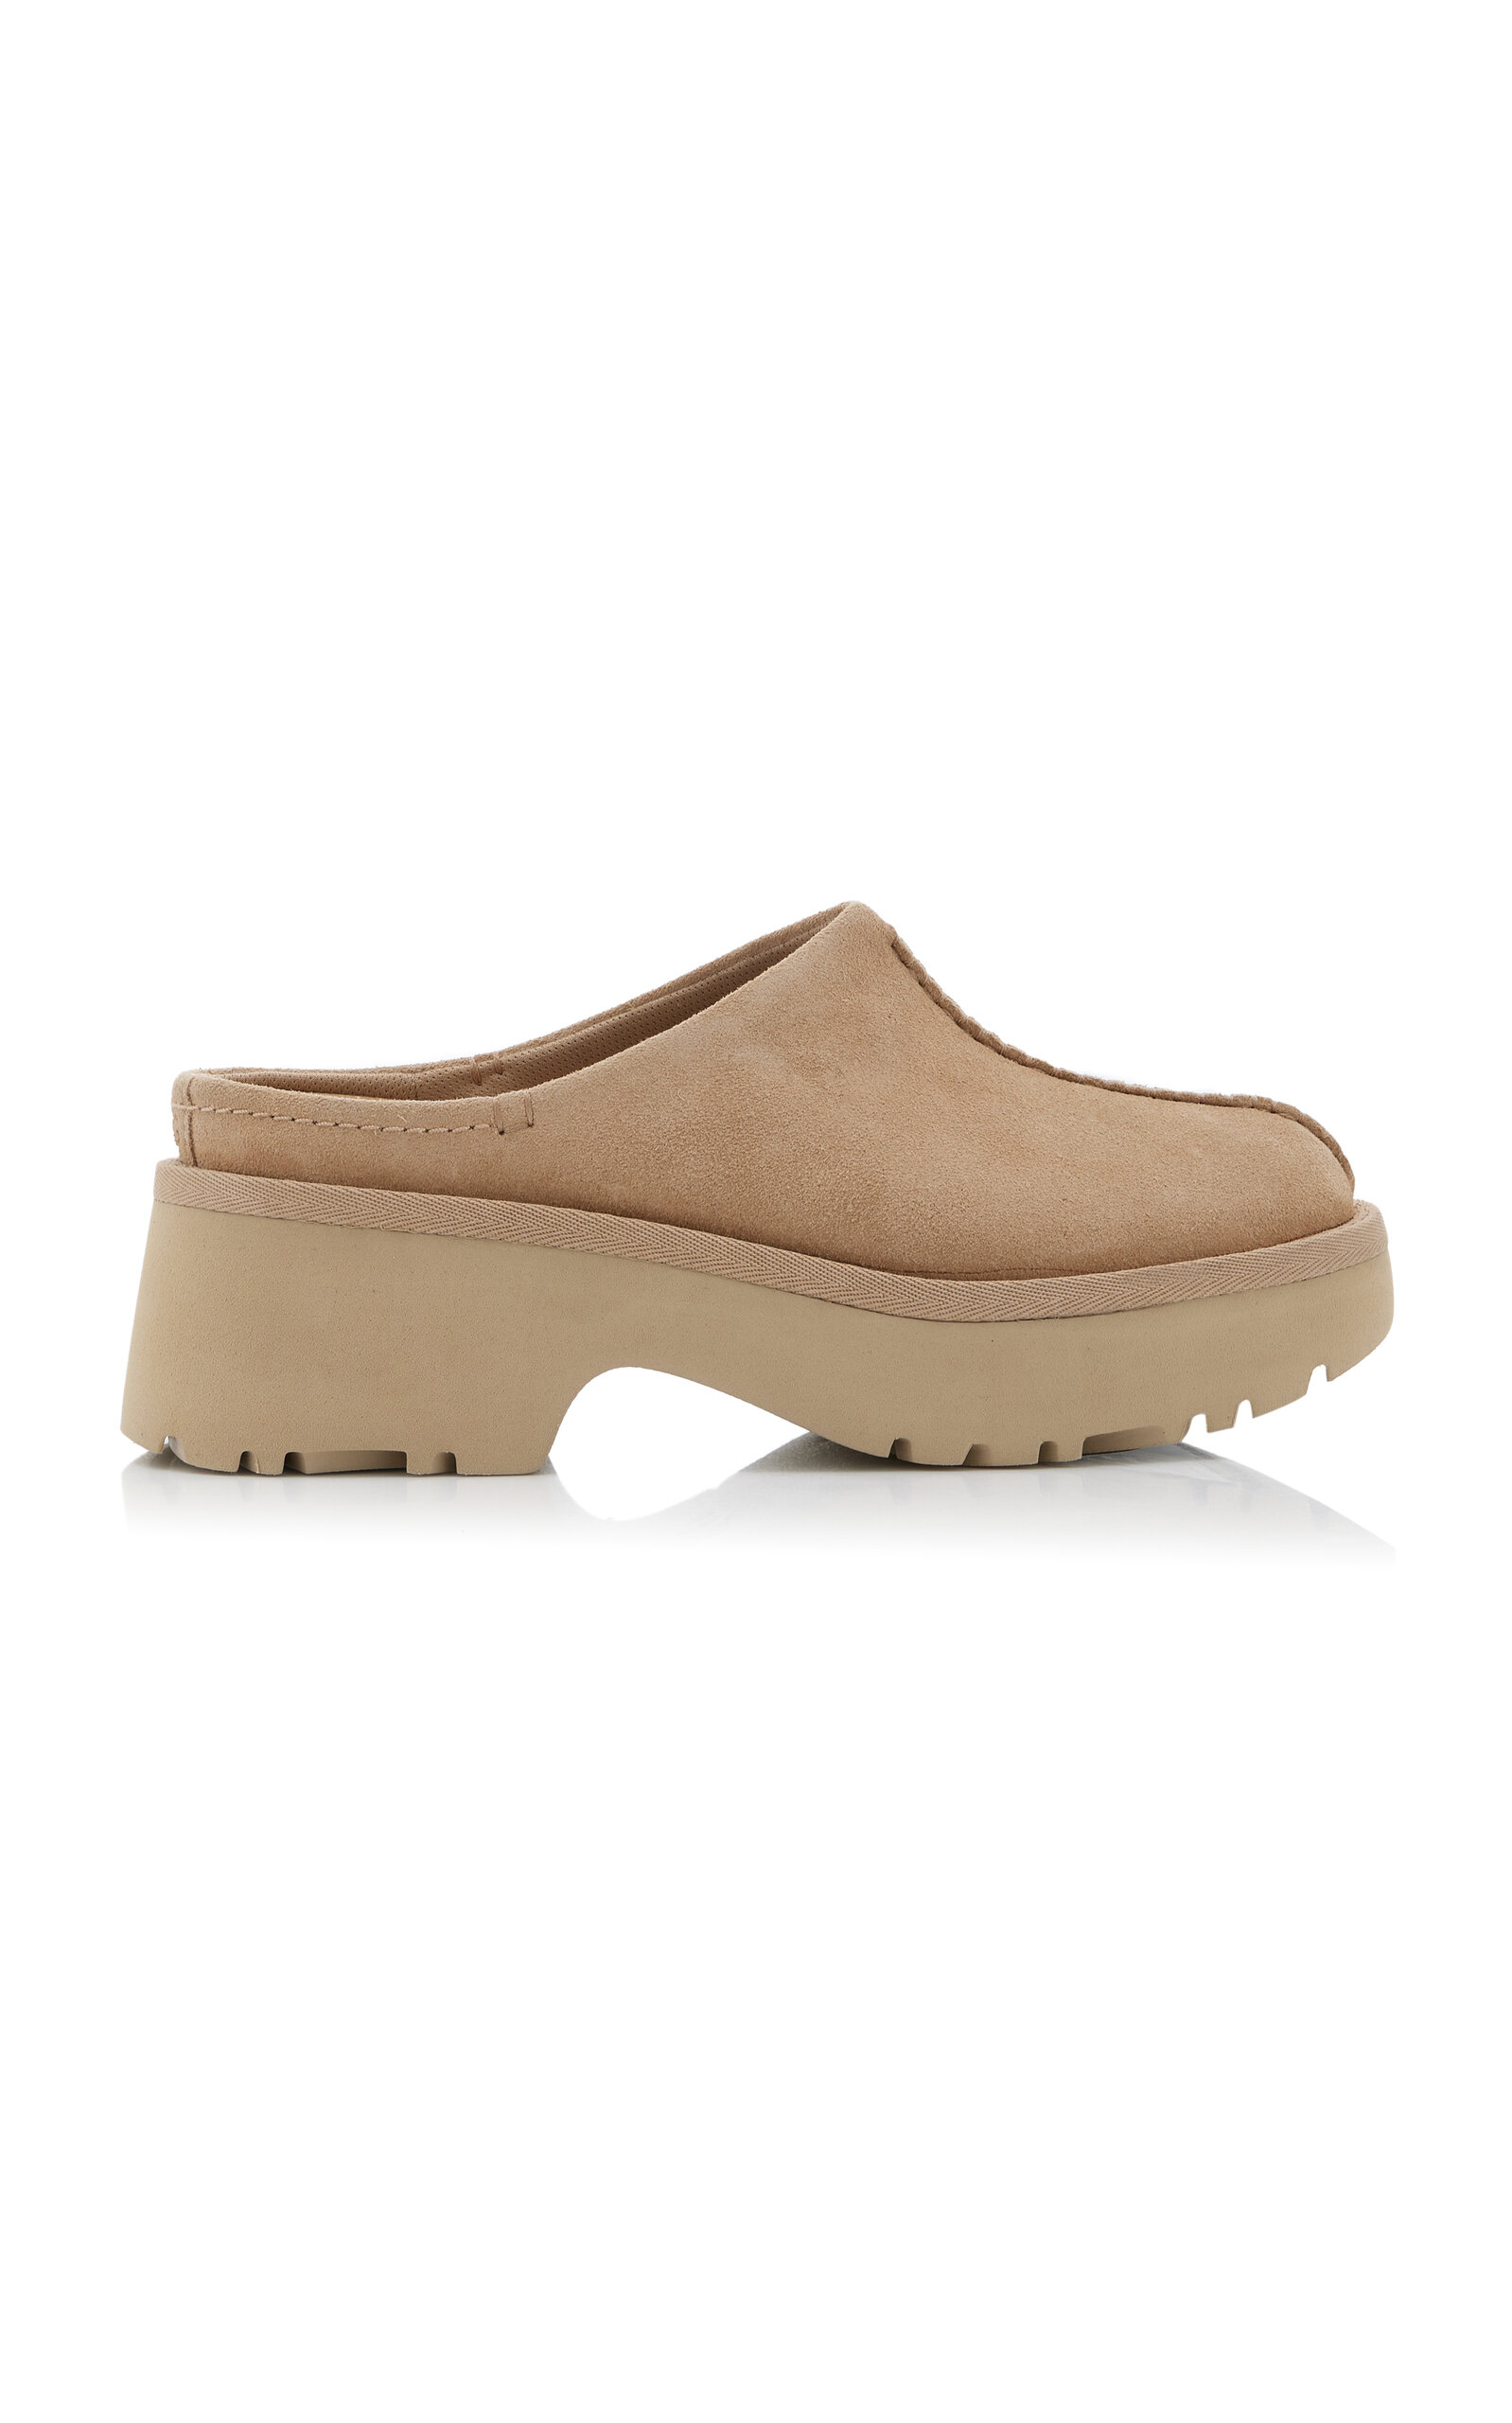 New Heights Suede Clogs